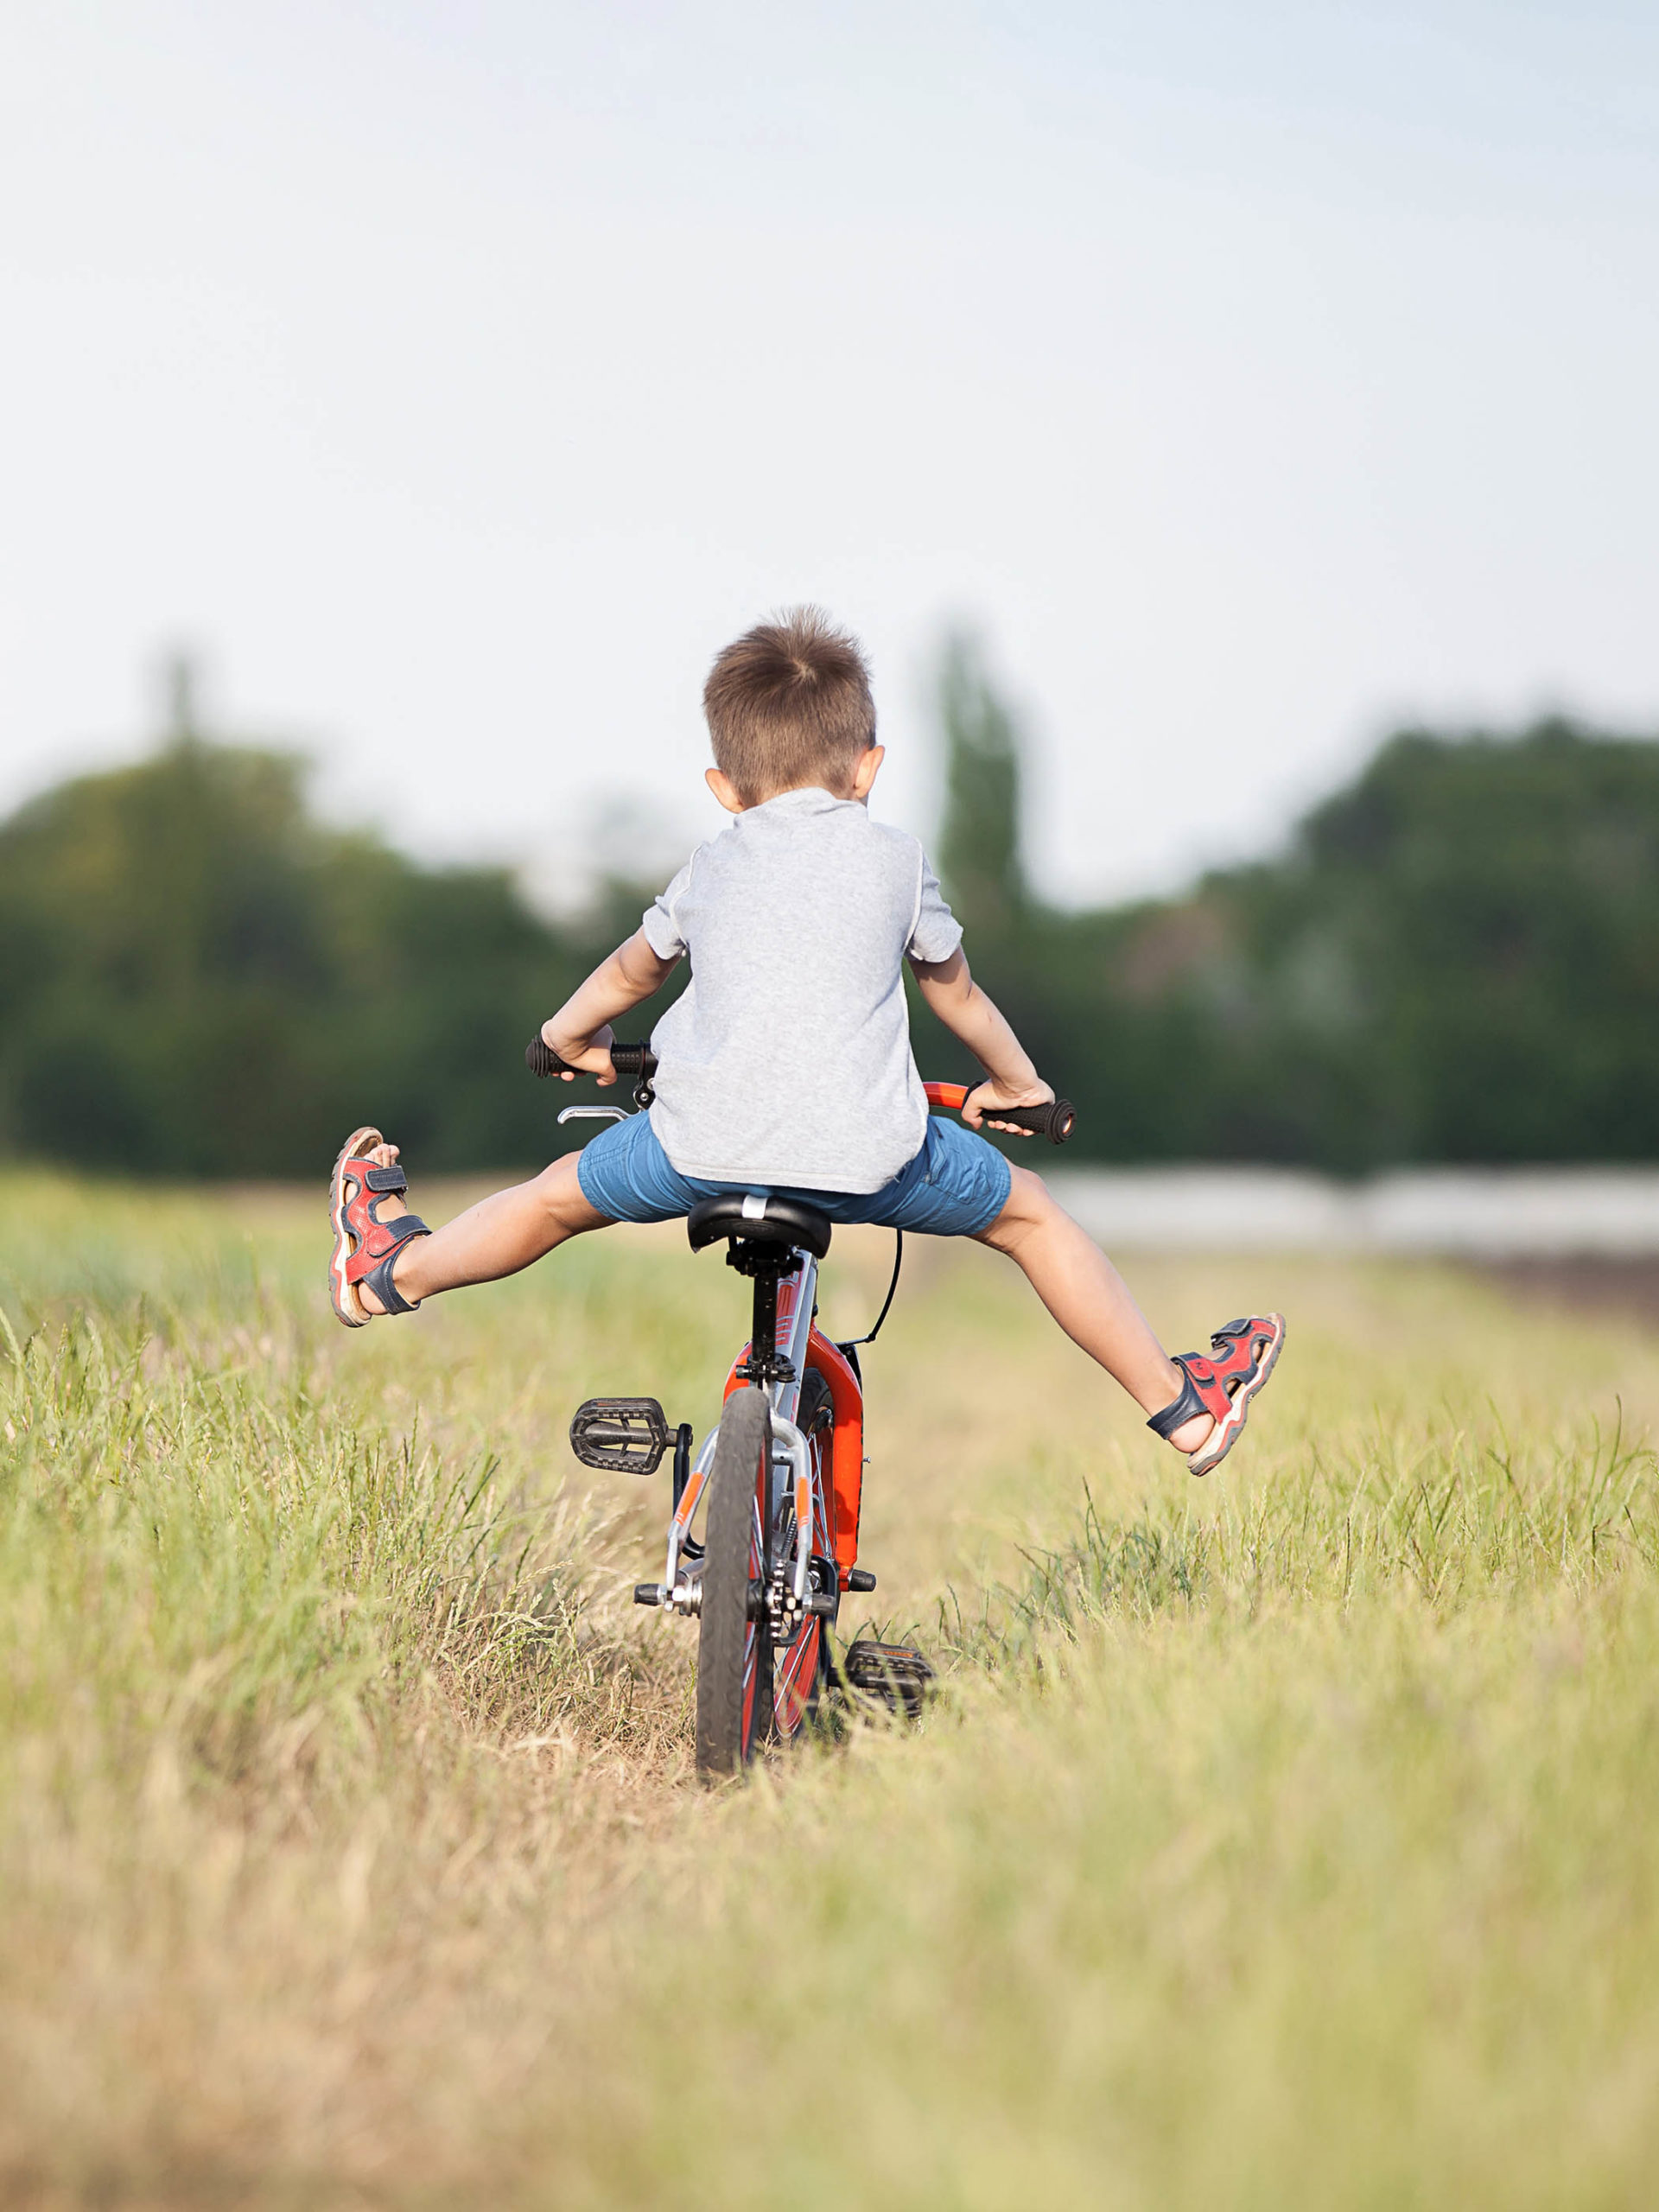 boy rides his bike through a meadow lifting his feet off the pedals